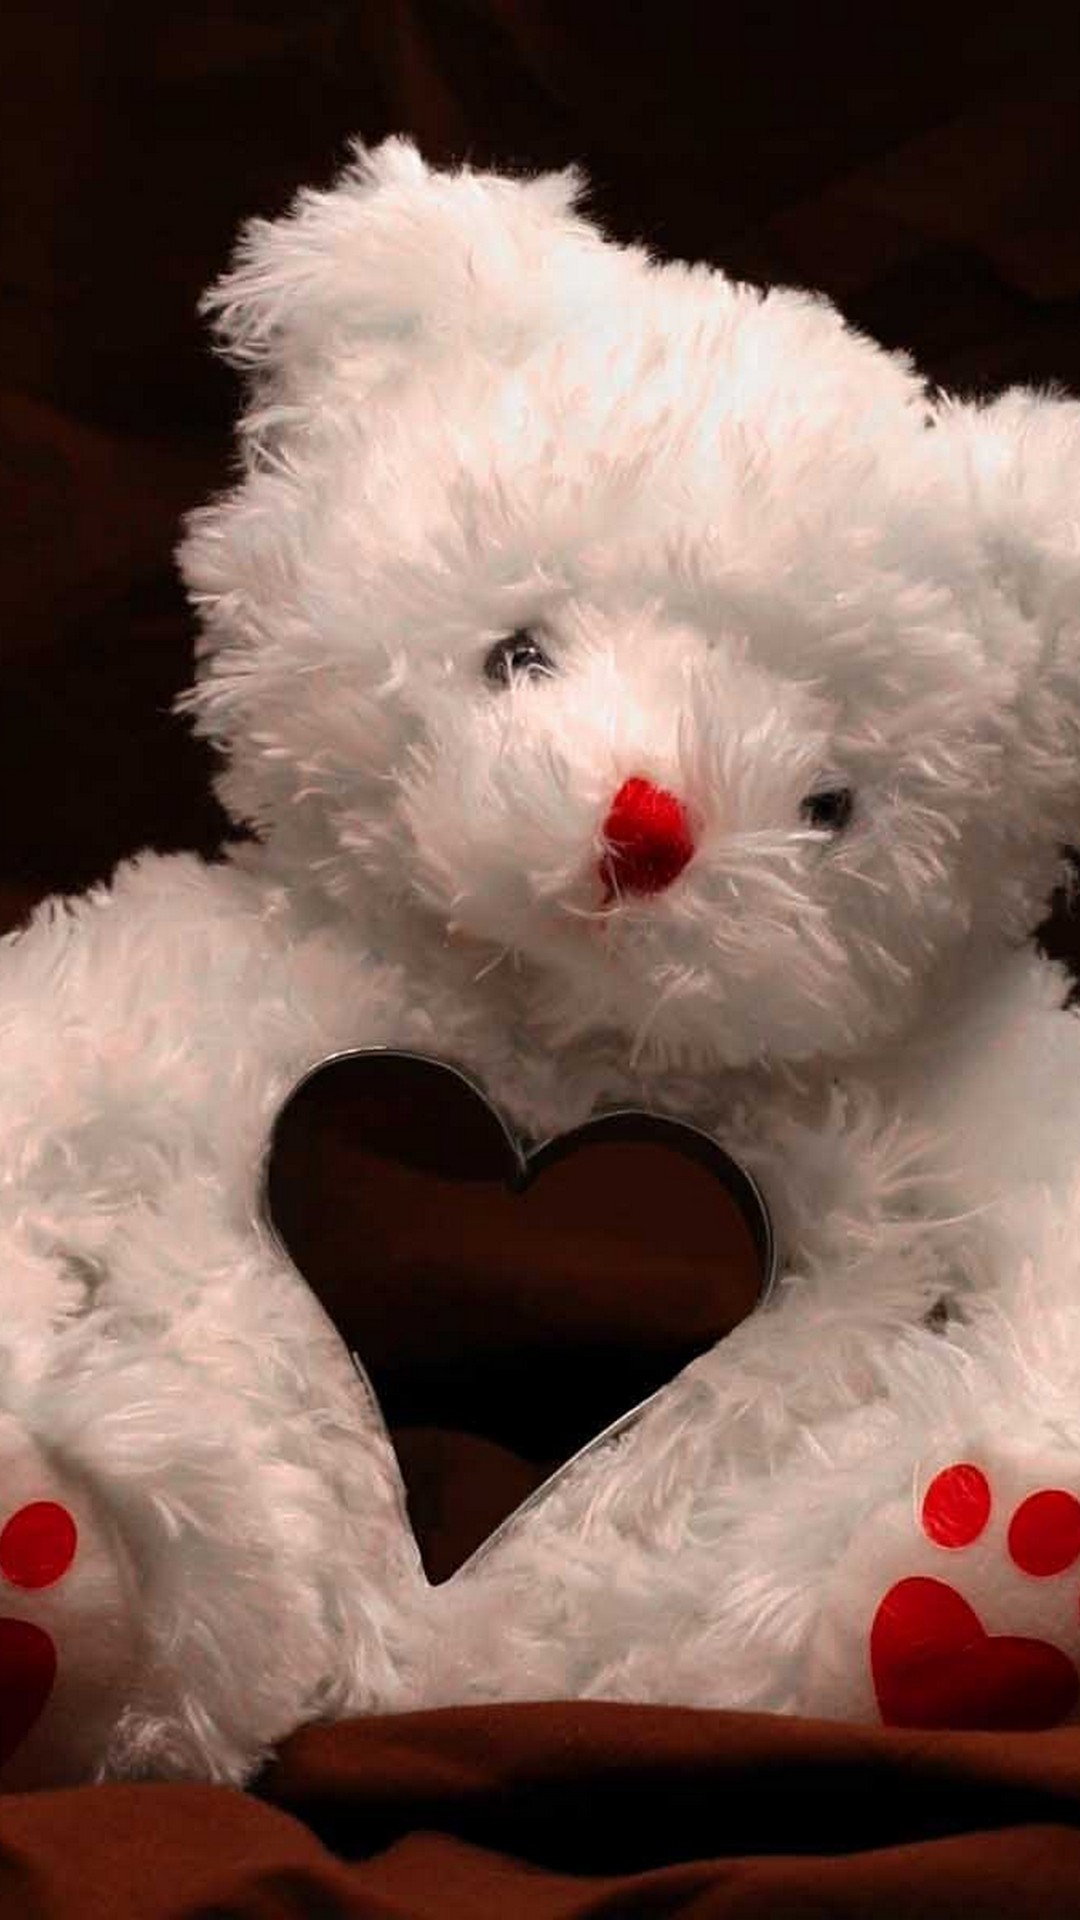 hd wallpapers for android mobile full screen,teddy bear,stuffed toy,nose,toy,love